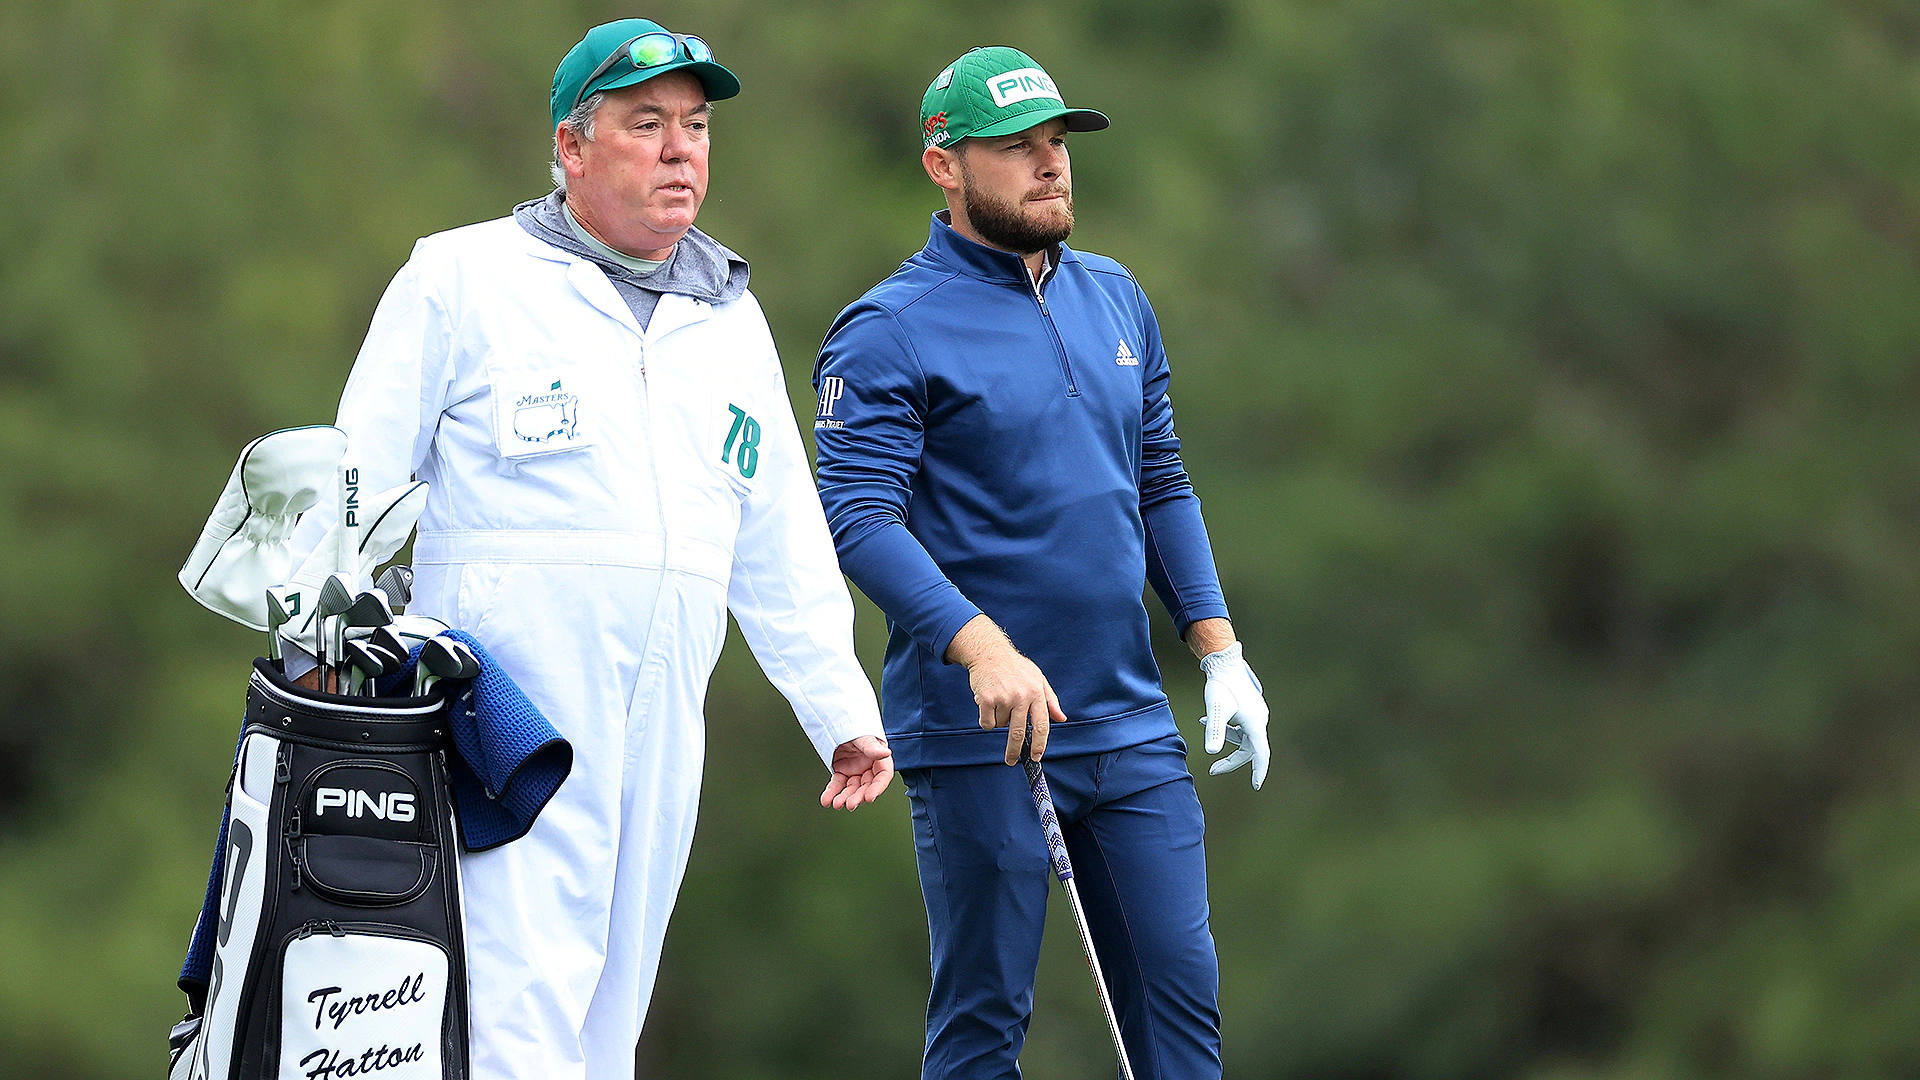 2022 Masters: Tyrrell Hatton: ‘Better off if I come back being a caddie’ at the Masters